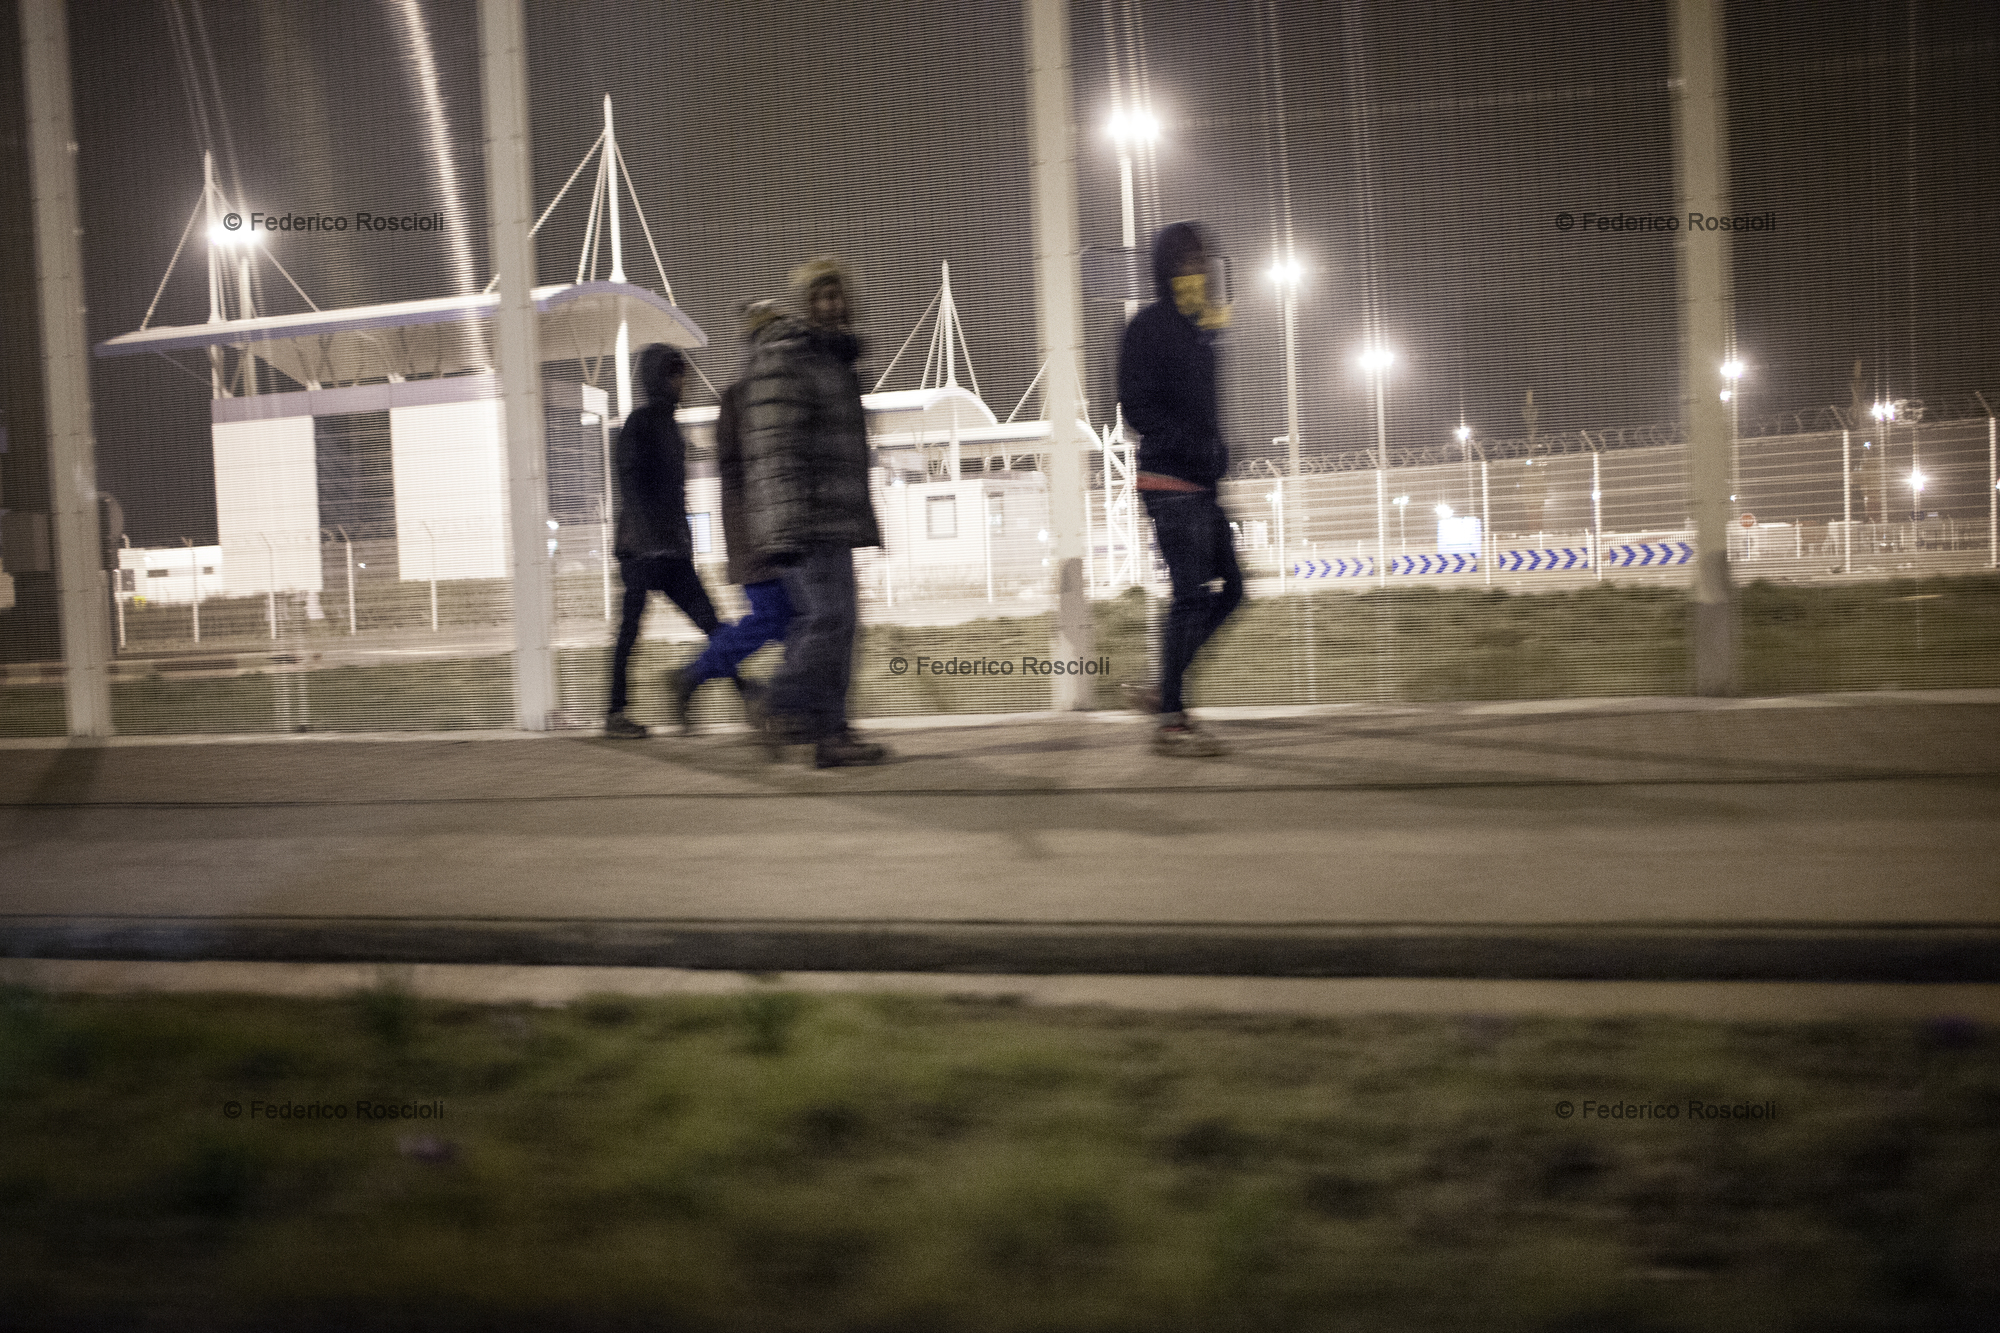 Calais, France. February 28, 2016. Migrants returning to the camp. During evenings and nights migrants walk from the camp to the train station or the truck parking in order to 'try it', meaning try to reach the UK.